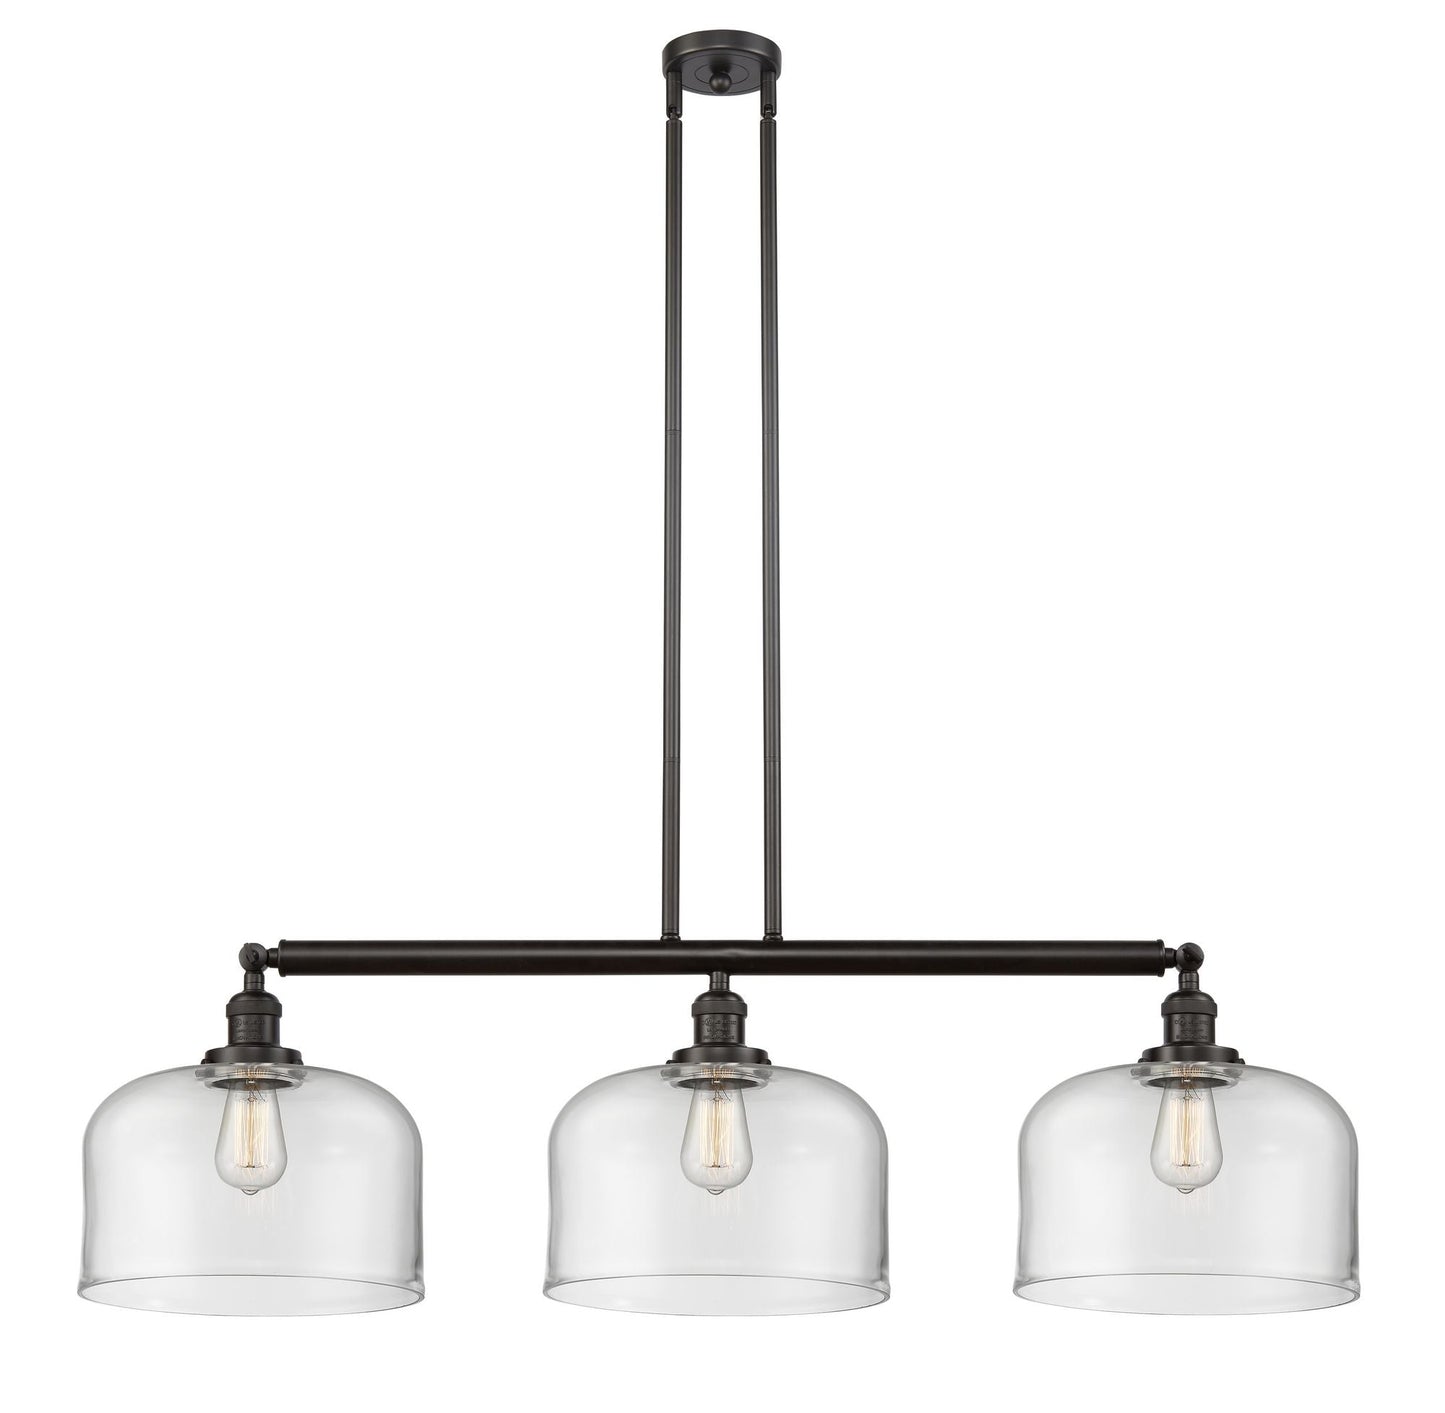 213-OB-G72-L 3-Light 42" Oil Rubbed Bronze Island Light - Clear X-Large Bell Glass - LED Bulb - Dimmensions: 42 x 12 x 13<br>Minimum Height : 22.25<br>Maximum Height : 46.25 - Sloped Ceiling Compatible: Yes